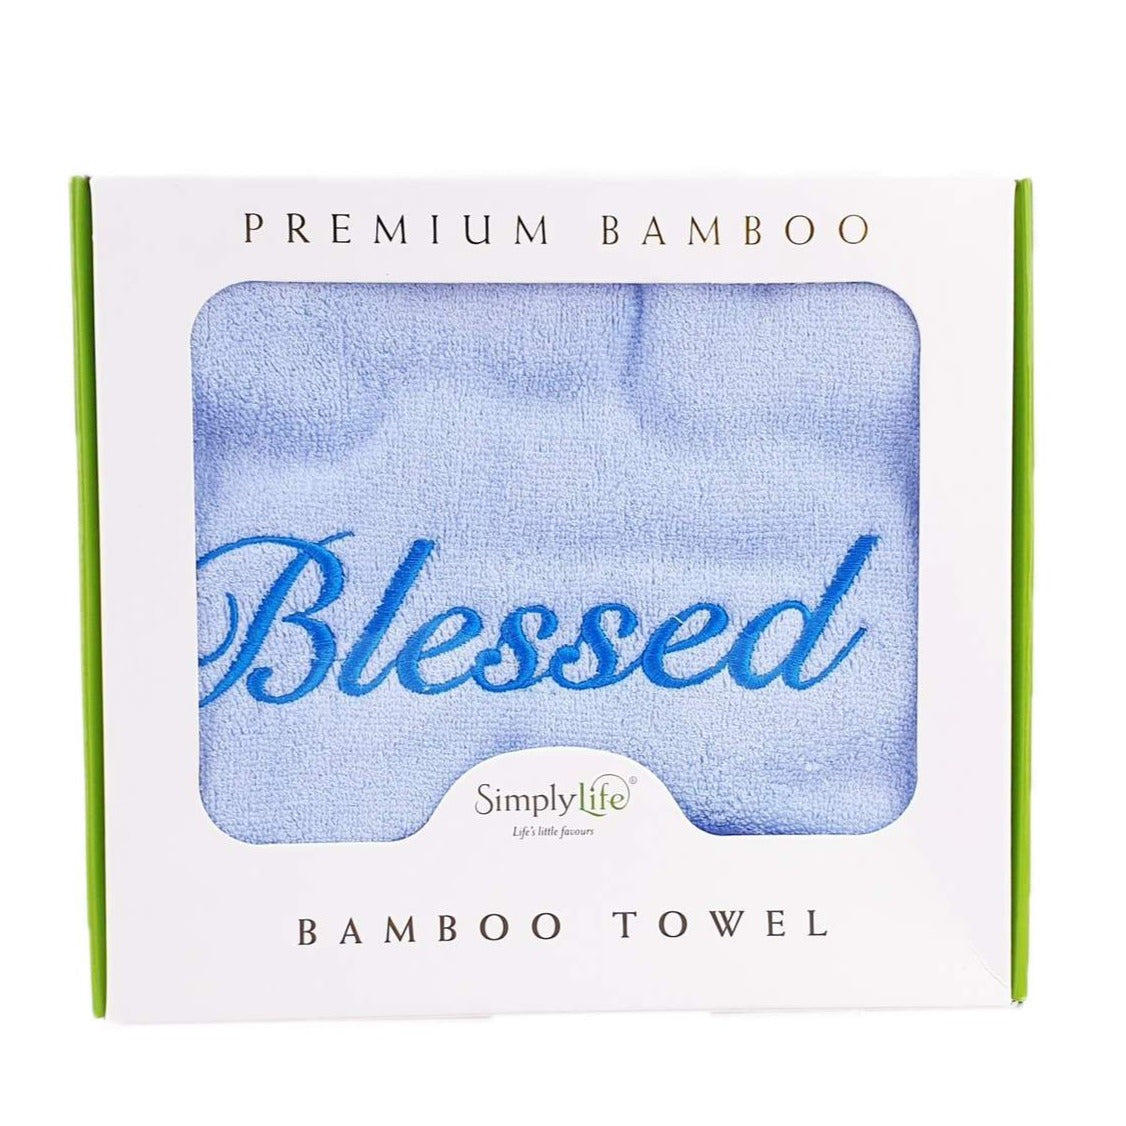 ROCKONLINE | New Creation Church | NCC | Joseph Prince | Embroidered Premium Bamboo Towel | Rock Bookshop | Rock Bookstore | Star Vista | Free Delivery for Singapore Orders above $50.